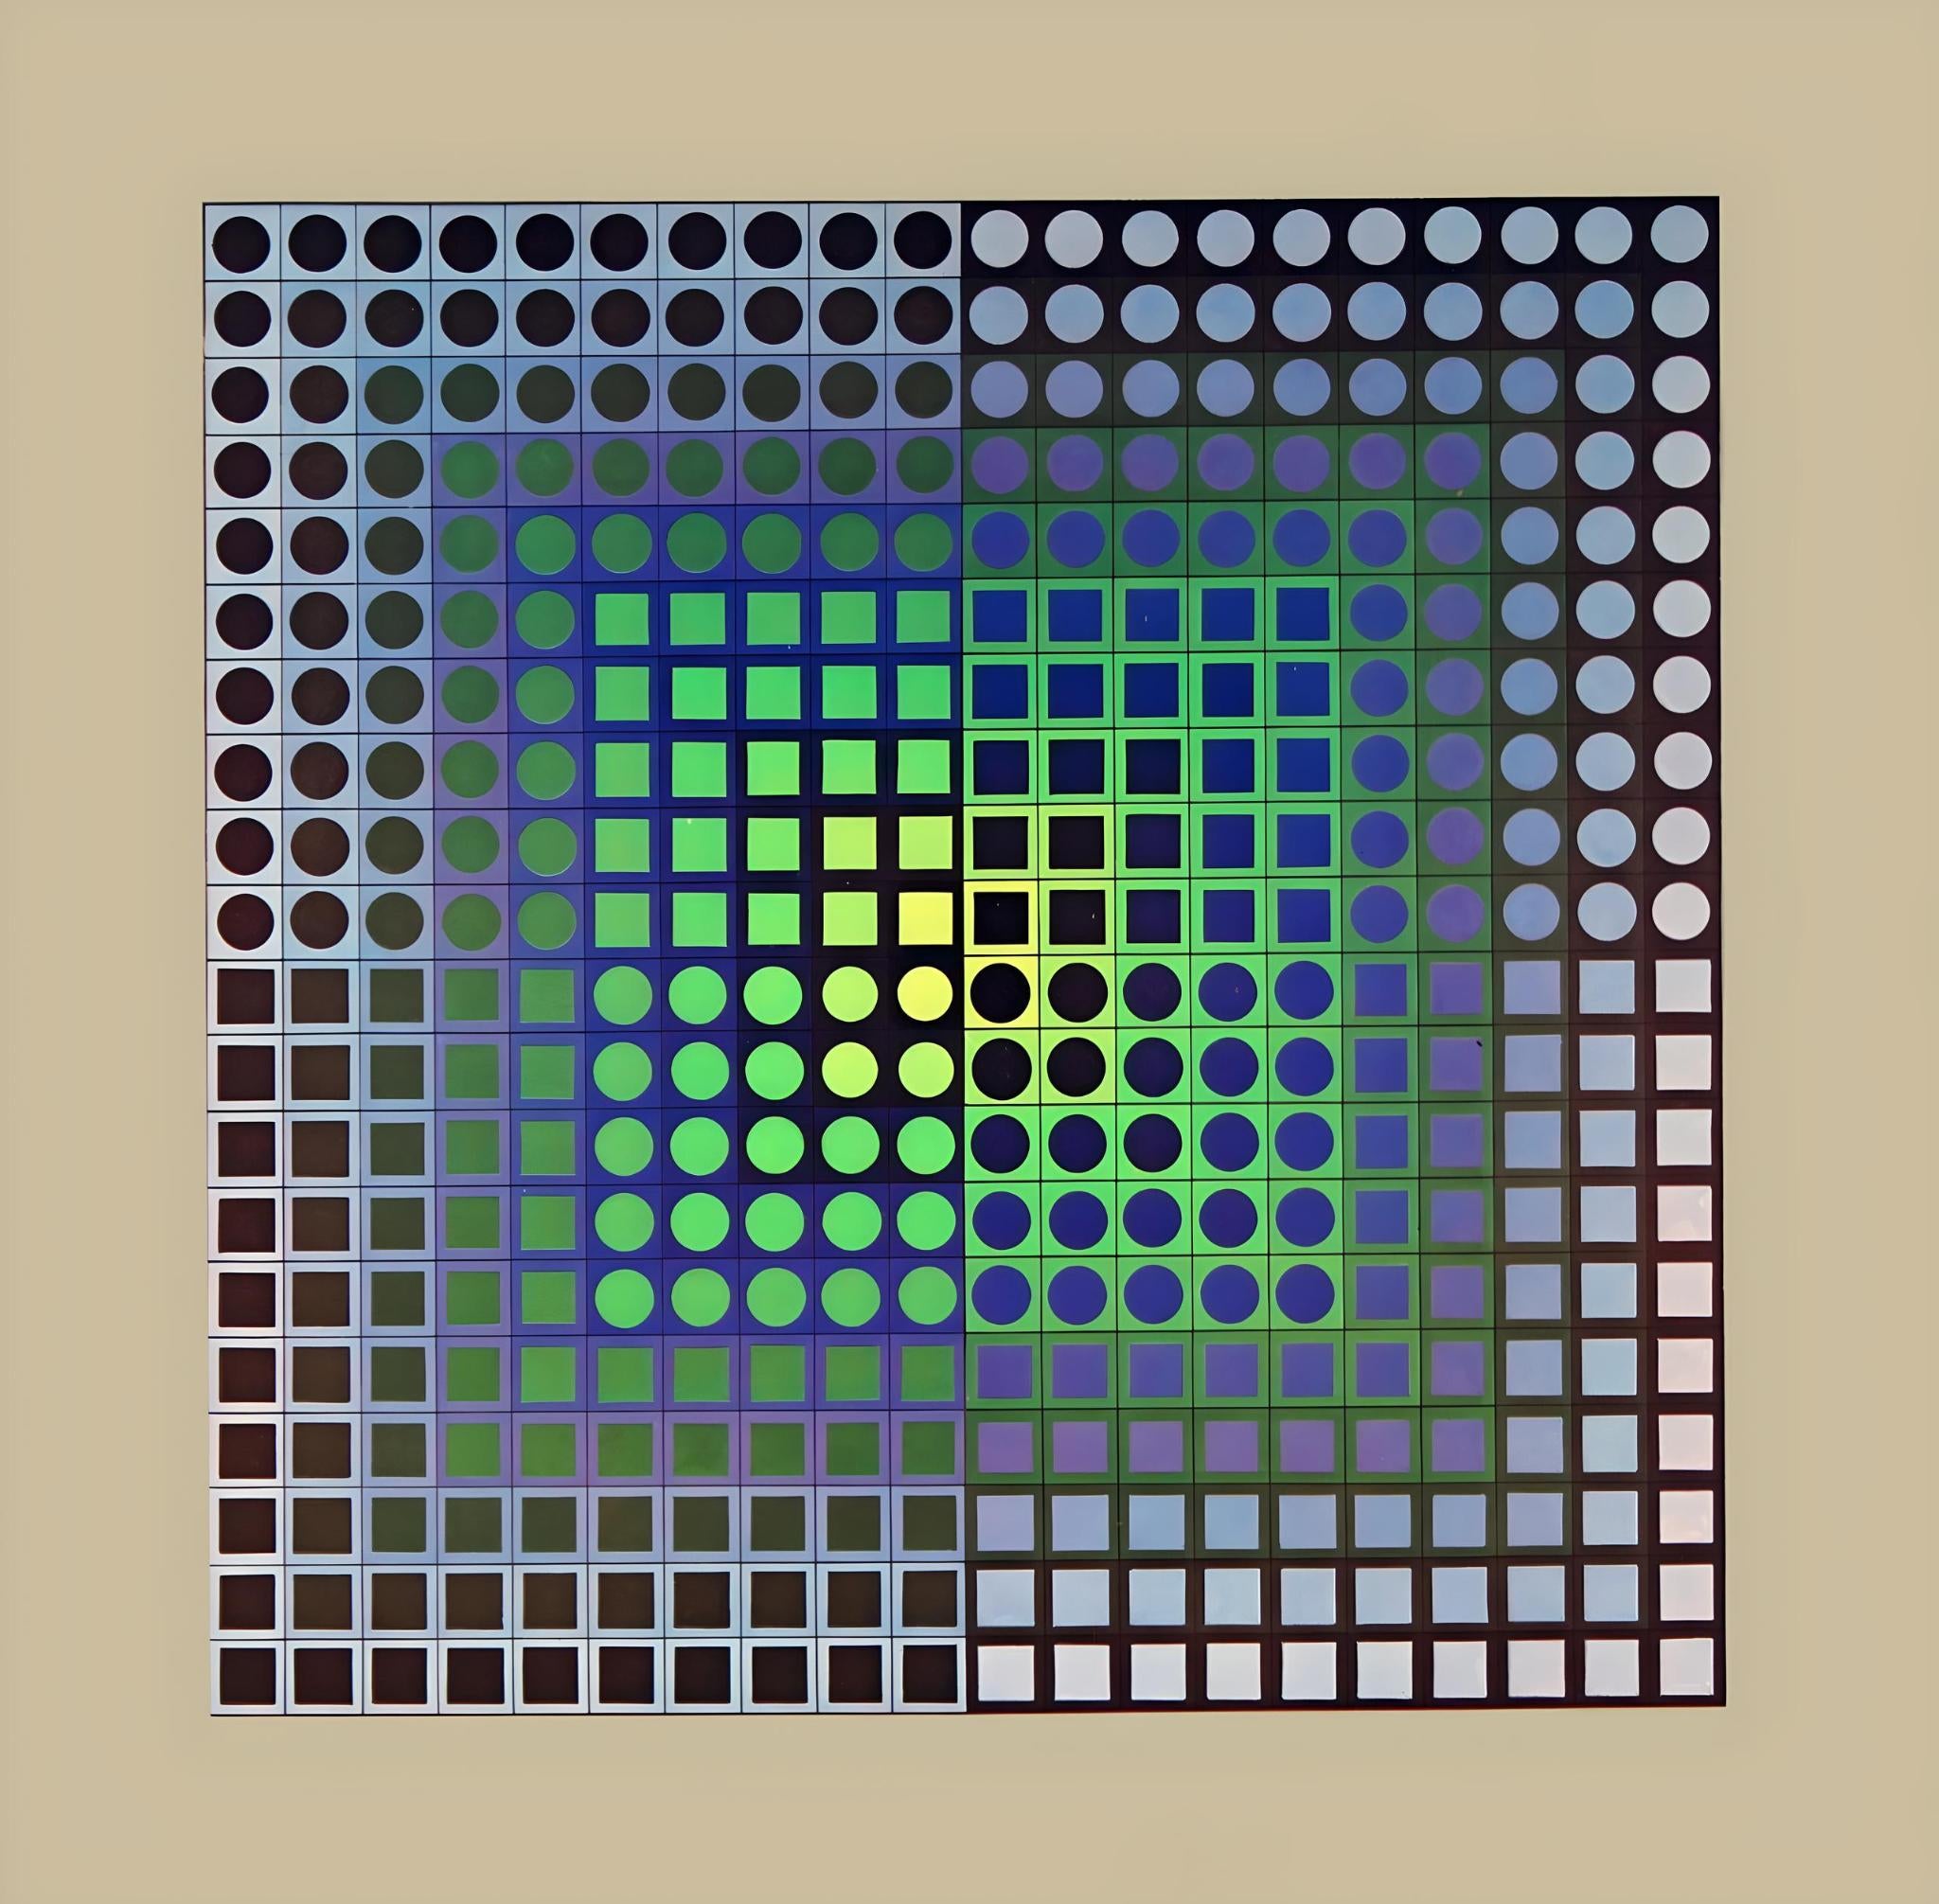 Victor Vasarely Abstract Print - Vasarely, Composition, Folklore planétaire (after)